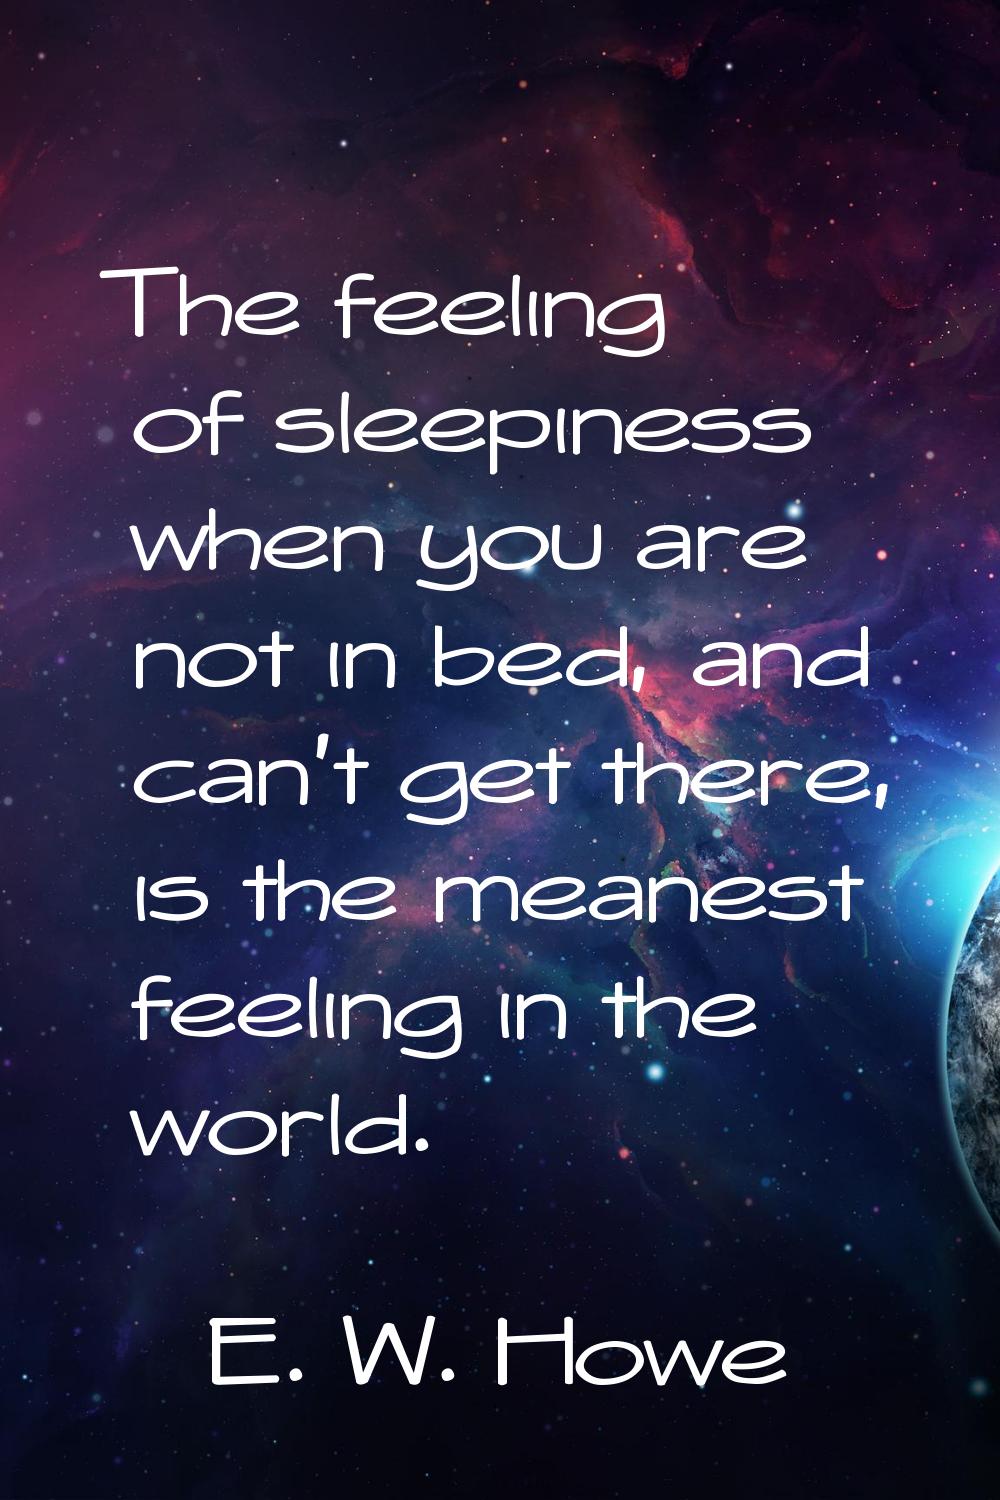 The feeling of sleepiness when you are not in bed, and can't get there, is the meanest feeling in t